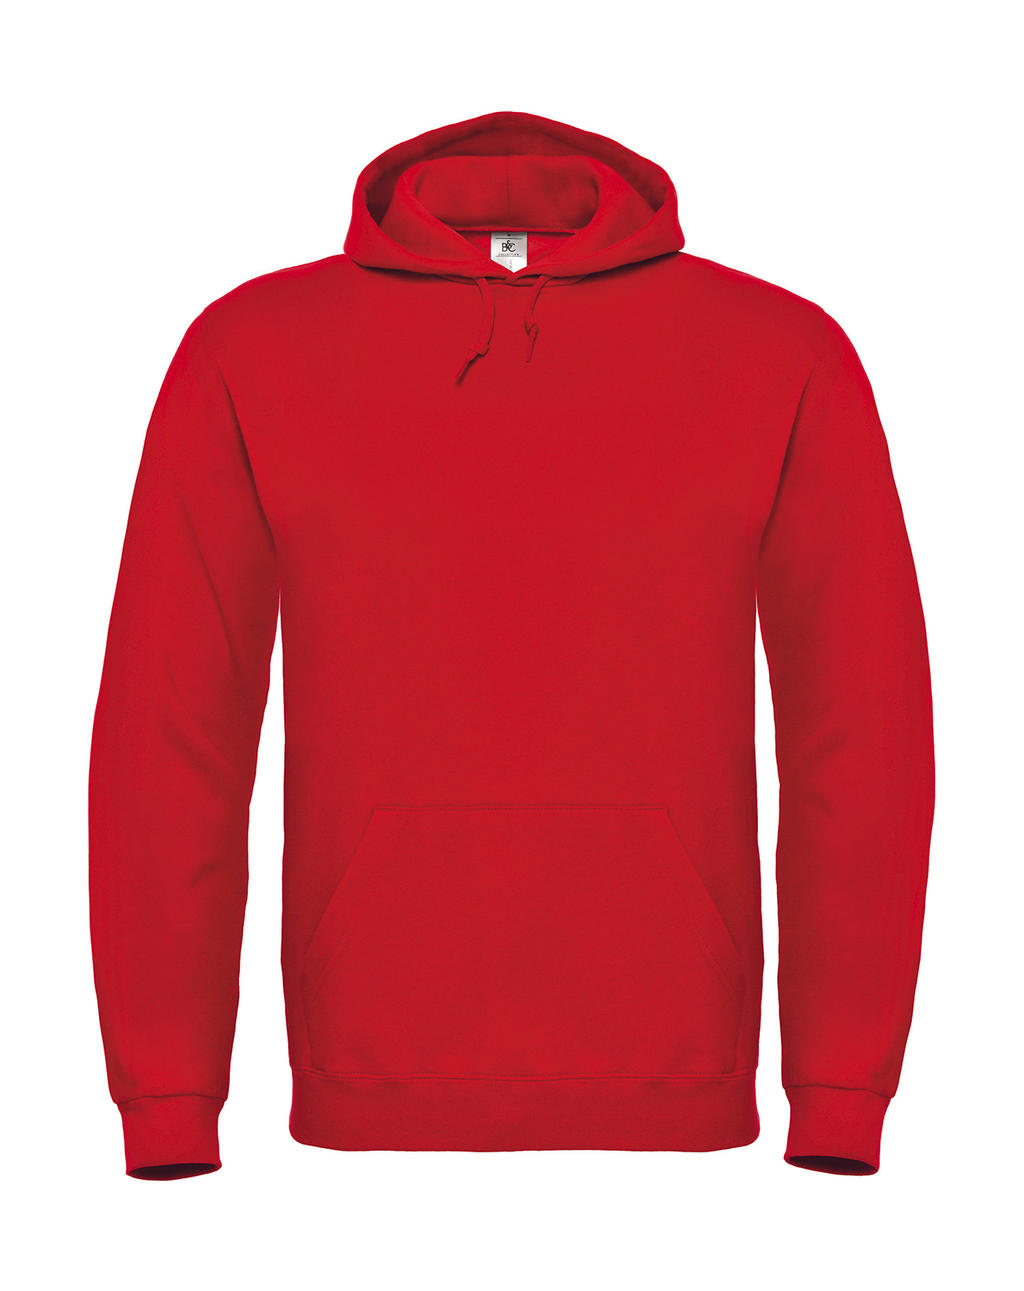  ID.003 Cotton Rich Hooded Sweatshirt in Farbe Red